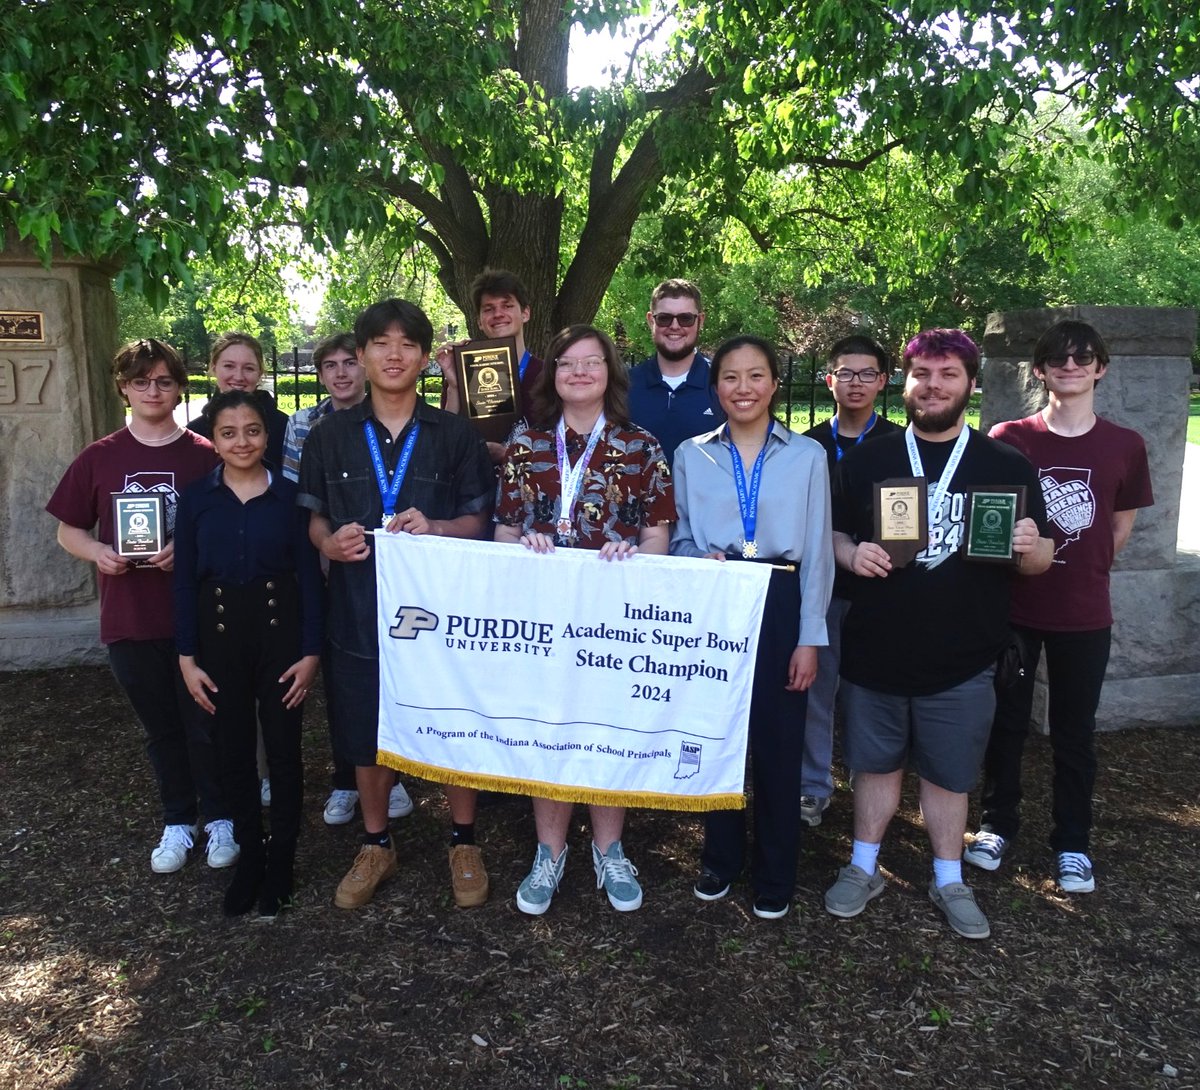 On Saturday, May 4, twelve Academy students competed at the state level for Academic Super Bowl in Science, Fine Arts, Mathematics, and Interdisciplinary.